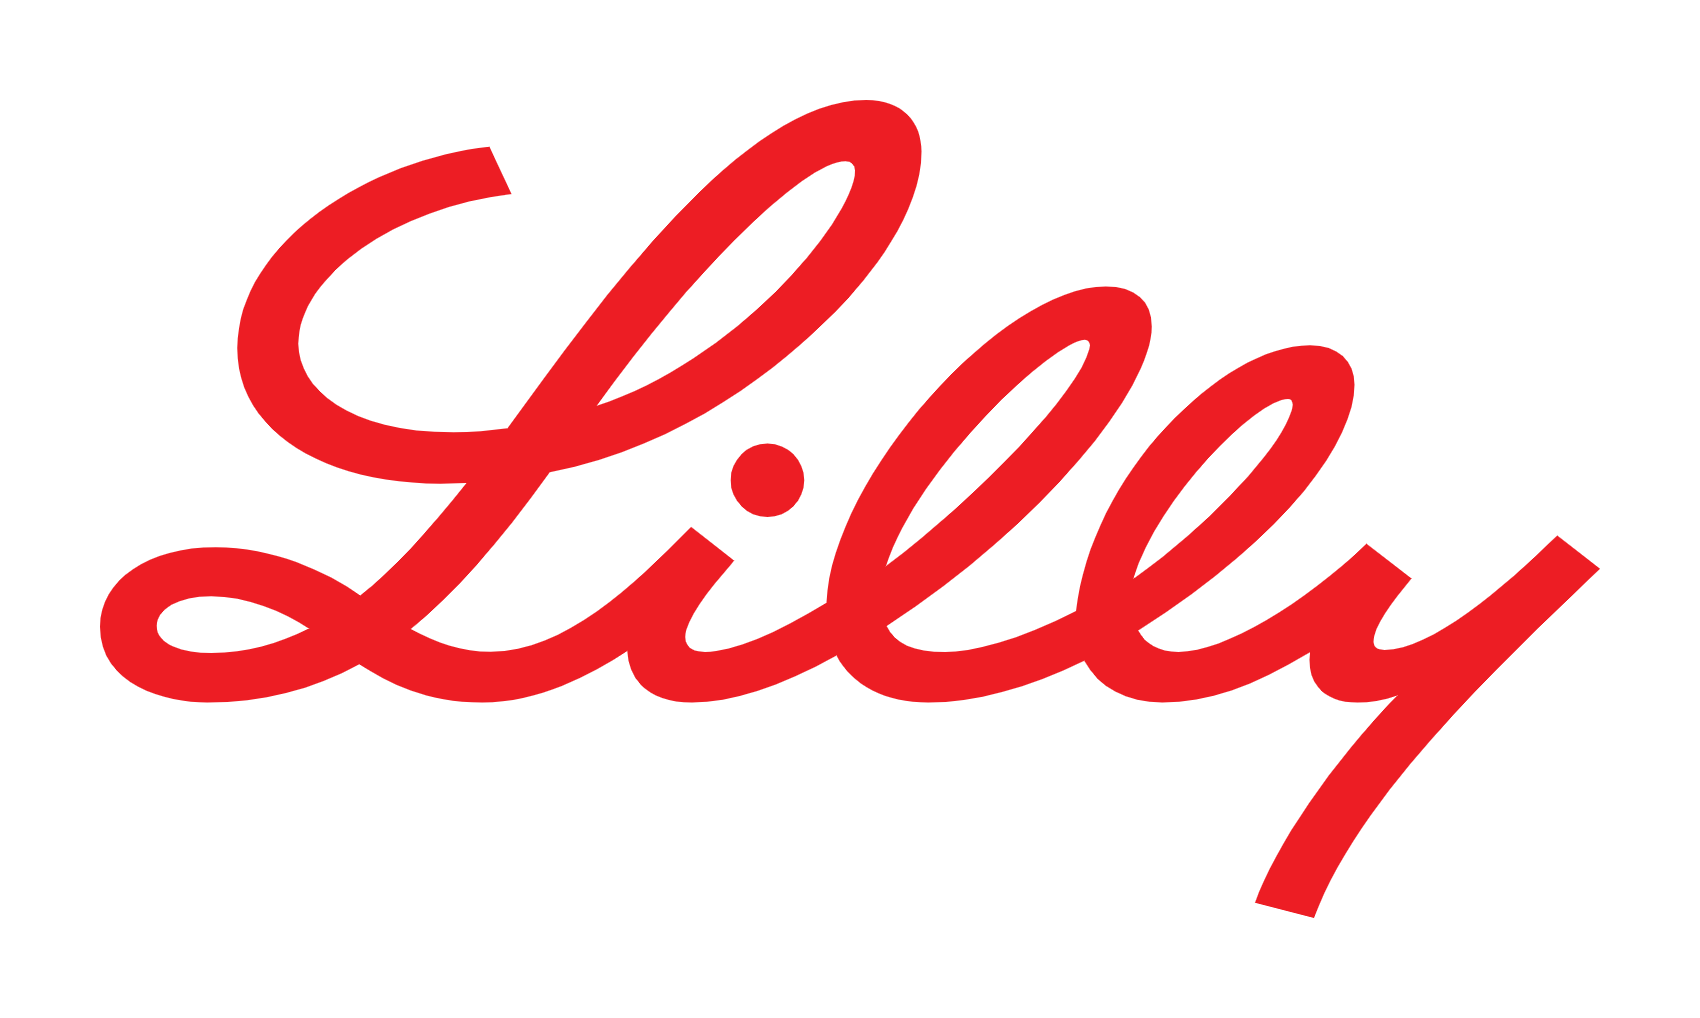 Download Eli lilly Logo PNG and Vector (PDF, SVG, Ai, EPS) Free